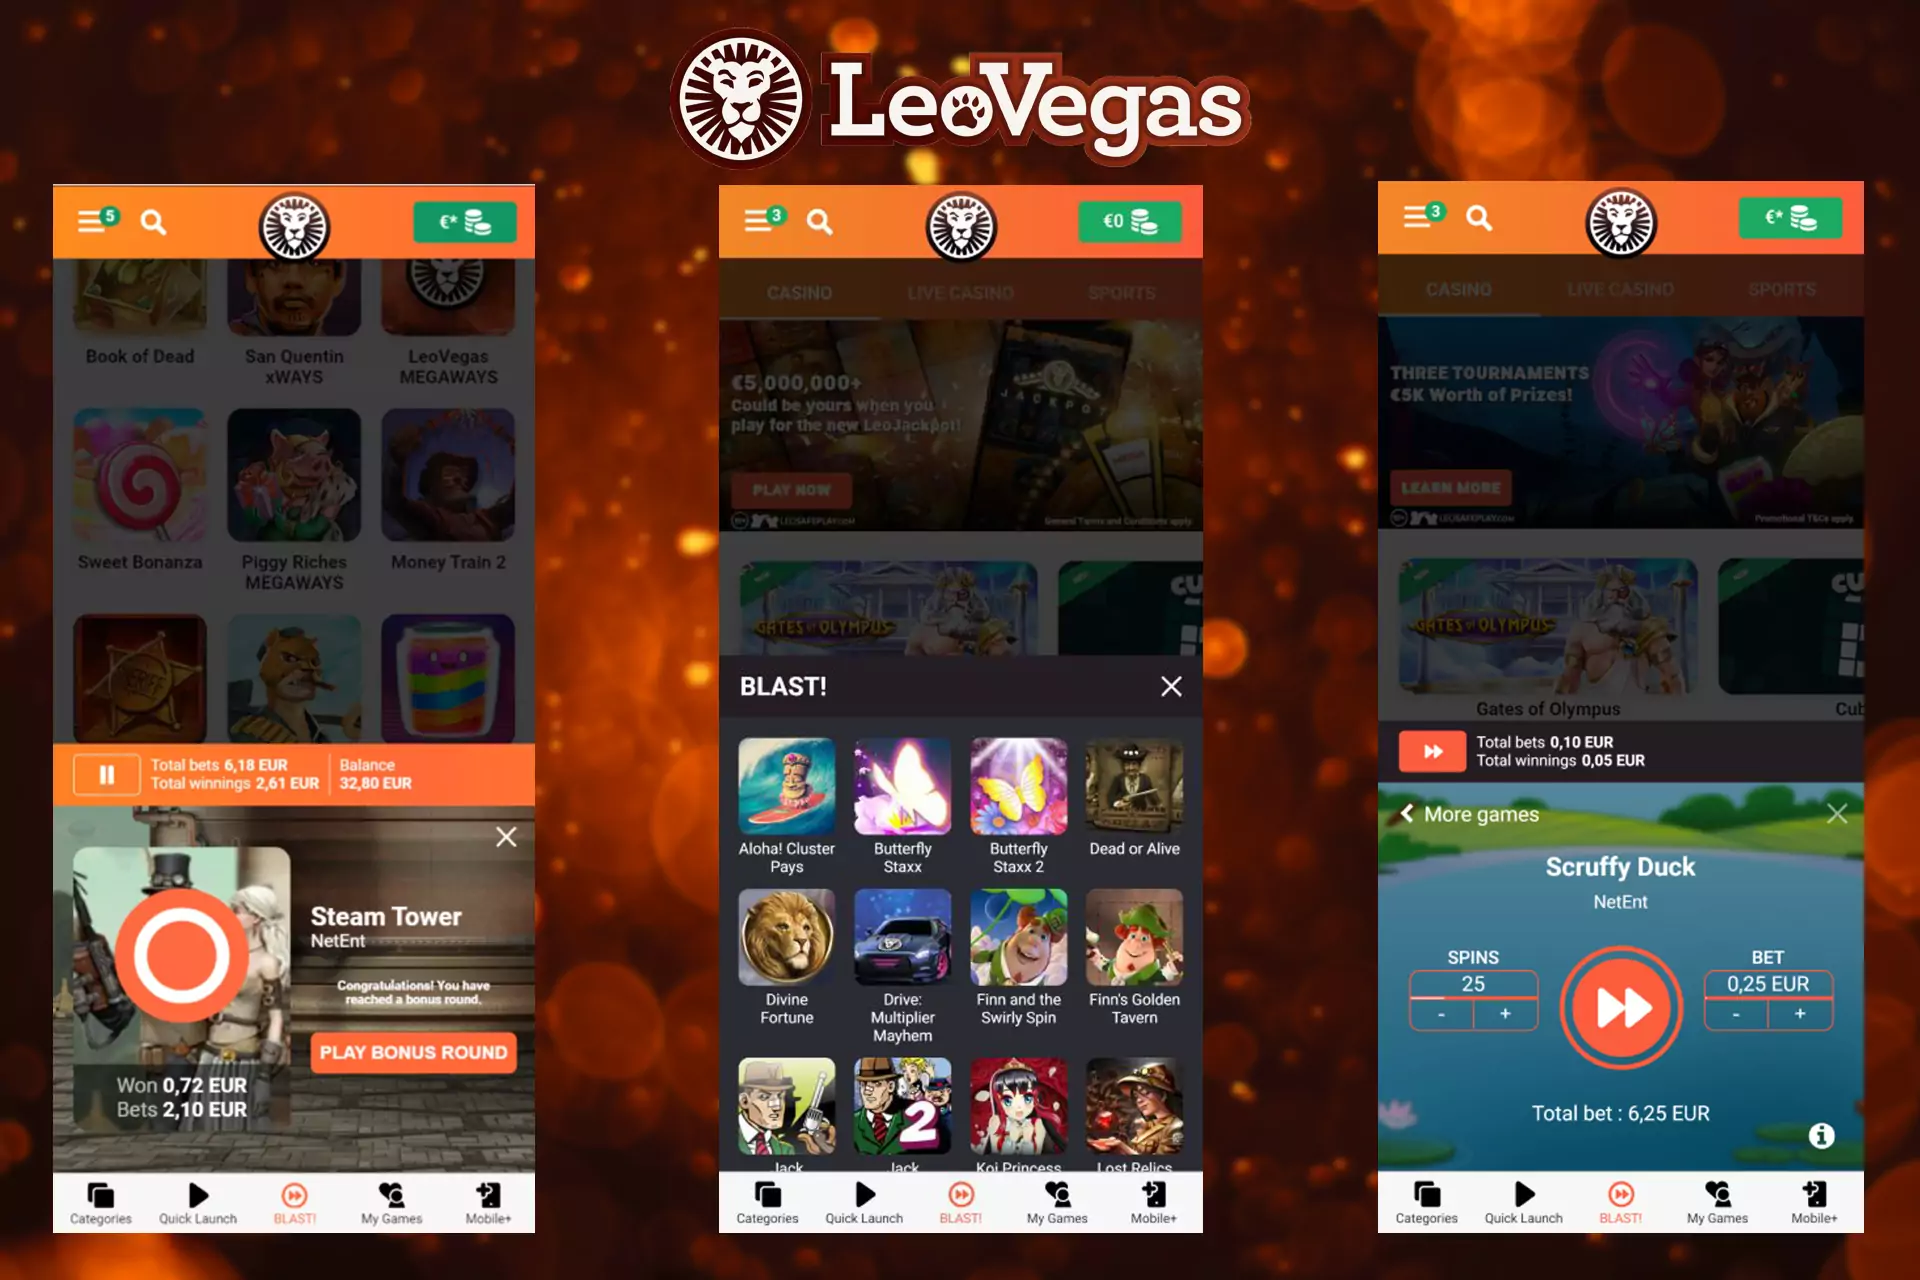 Users of LeoVegas can accept weekly bonuses, play slots, and have VIP privileges.